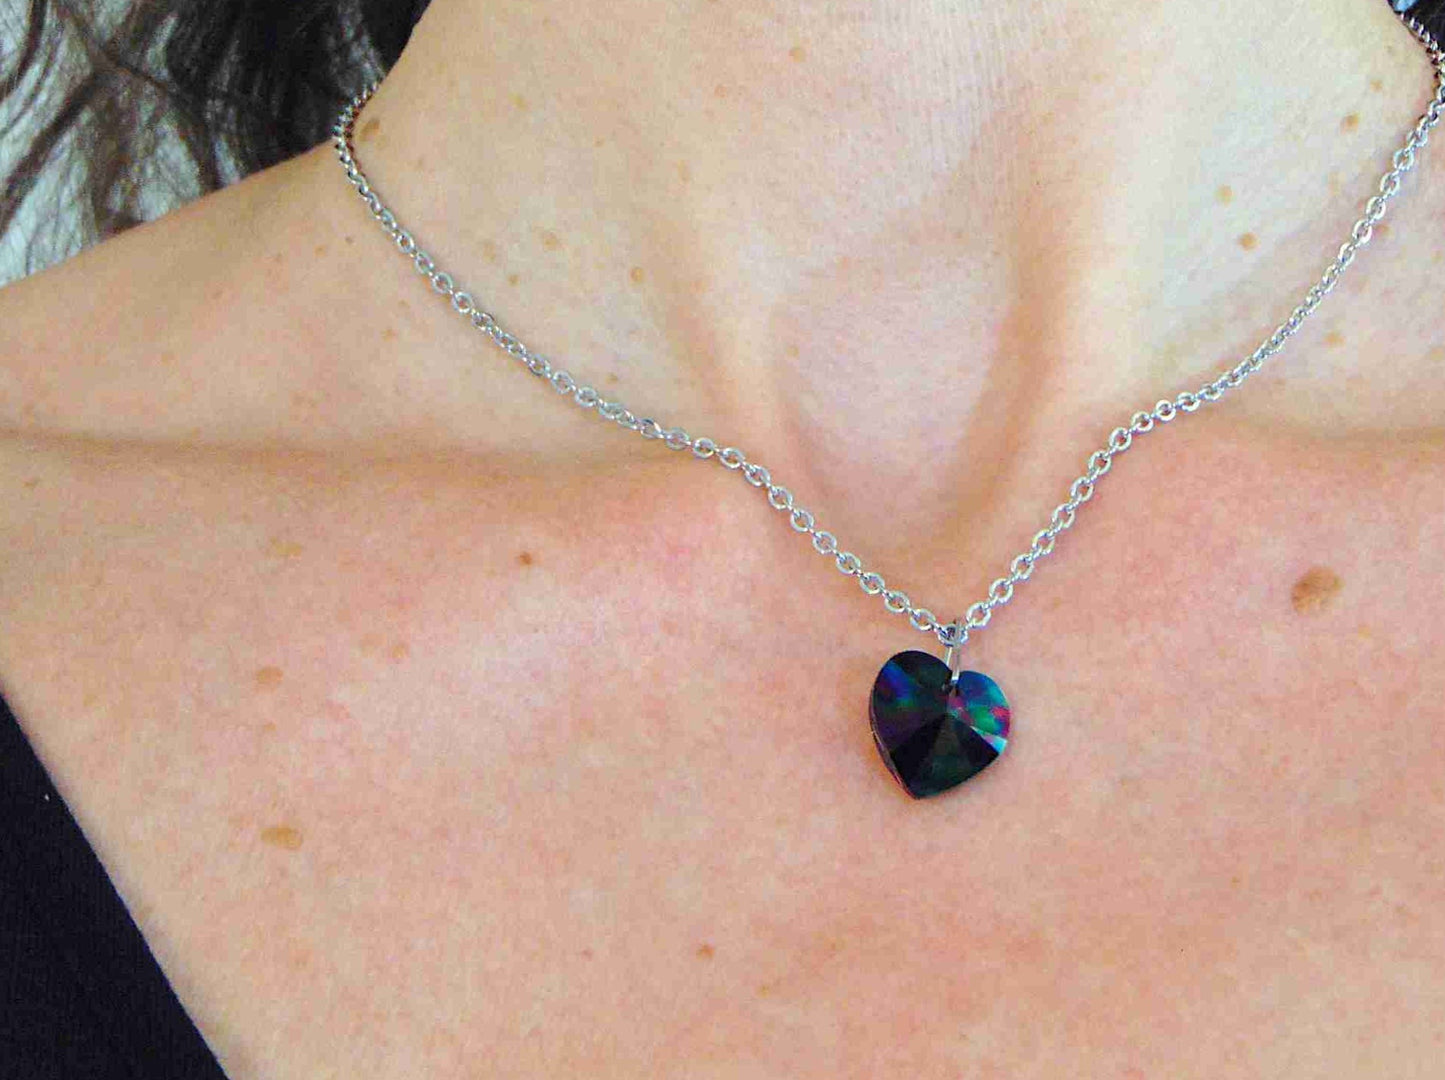 14/16-inch necklace with 14mm Dark Rainbow faceted Swarovski crystal heart pendant, stainless steel chain